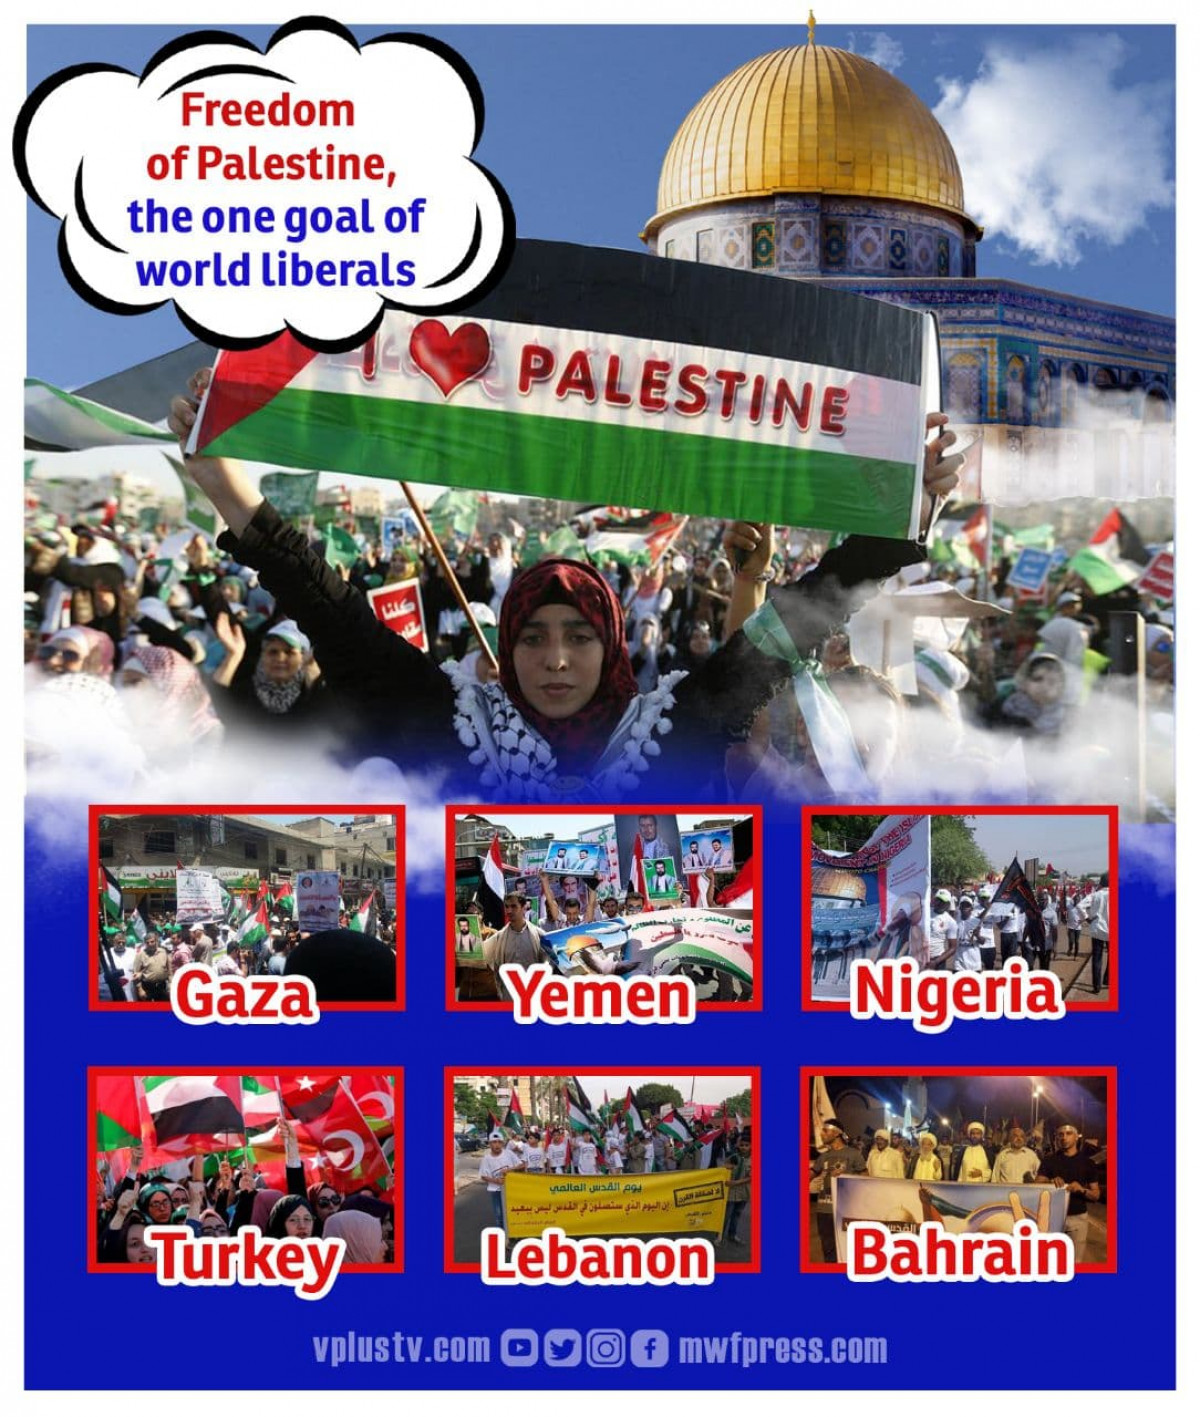 Freedom of Palestine, the one goal of world liberals1